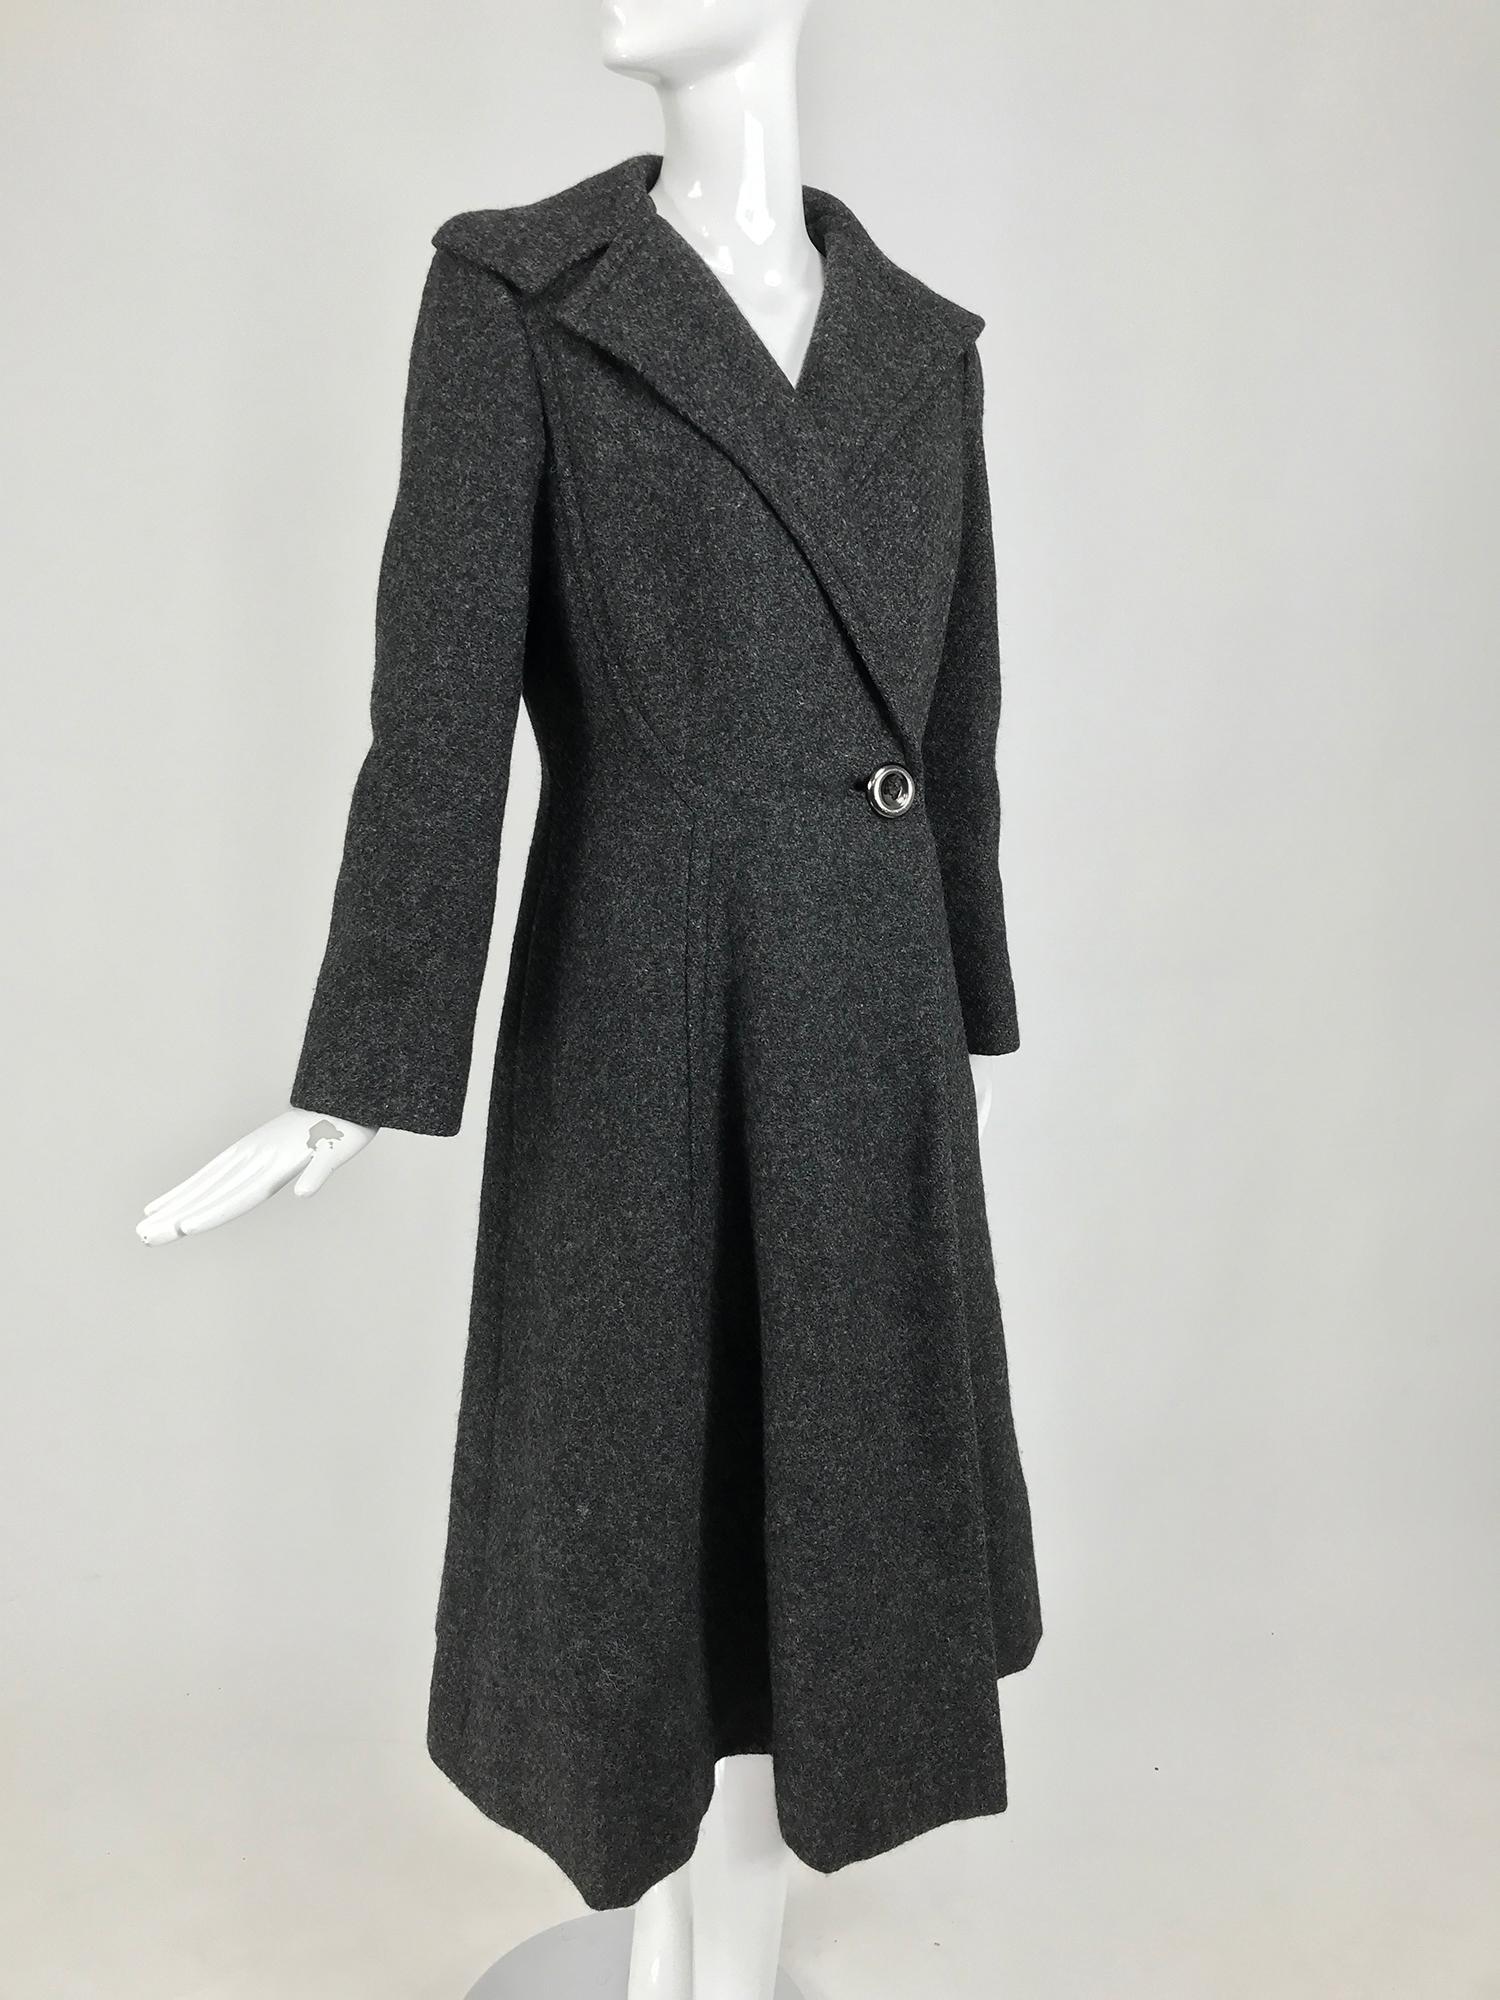 Pauline Trigere grey flecked wool princess coat from the 1950s. Dark charcoal grey flecked wool coat with wide shaped lapels closes at the waist with a single silver metal button. The coat has a fitted waist, the skirt flares to the hem. The coat